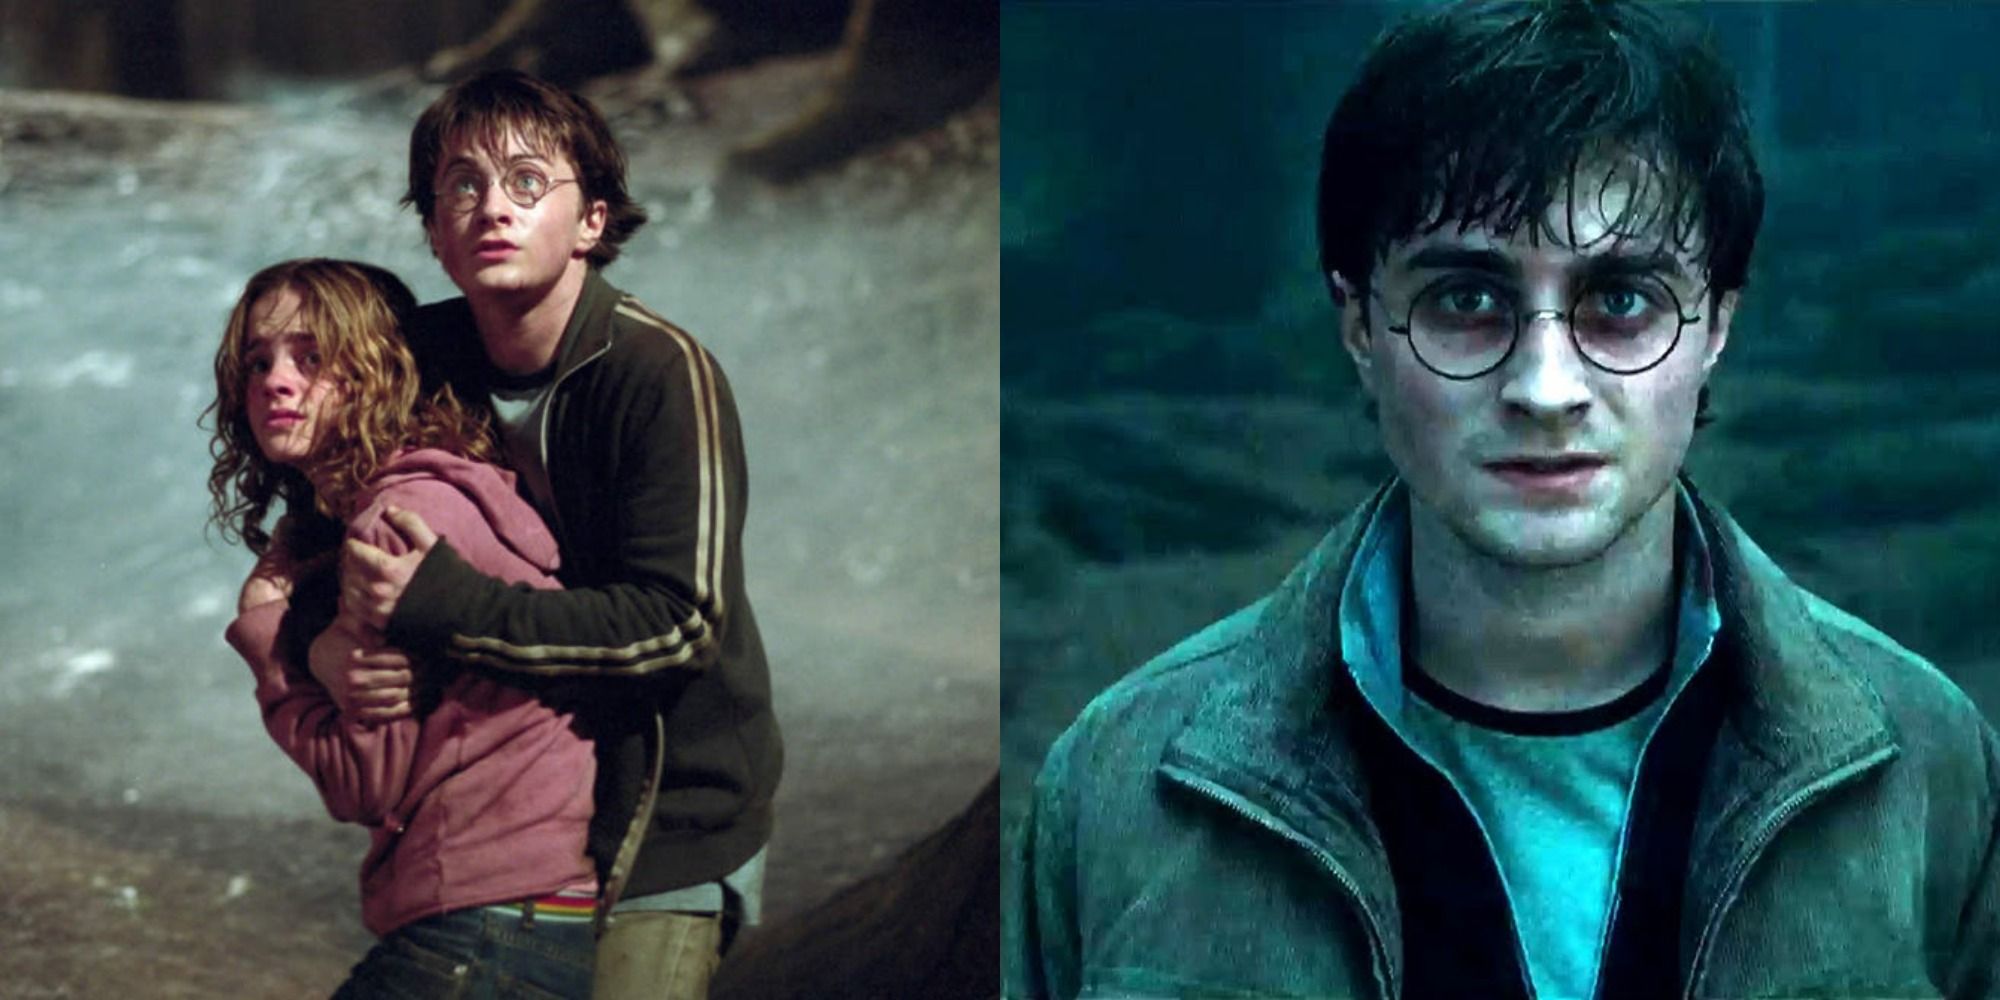 A comparison photo that shows Harry in The Prisoners of Azkaban and the other in the Deathly Hallows